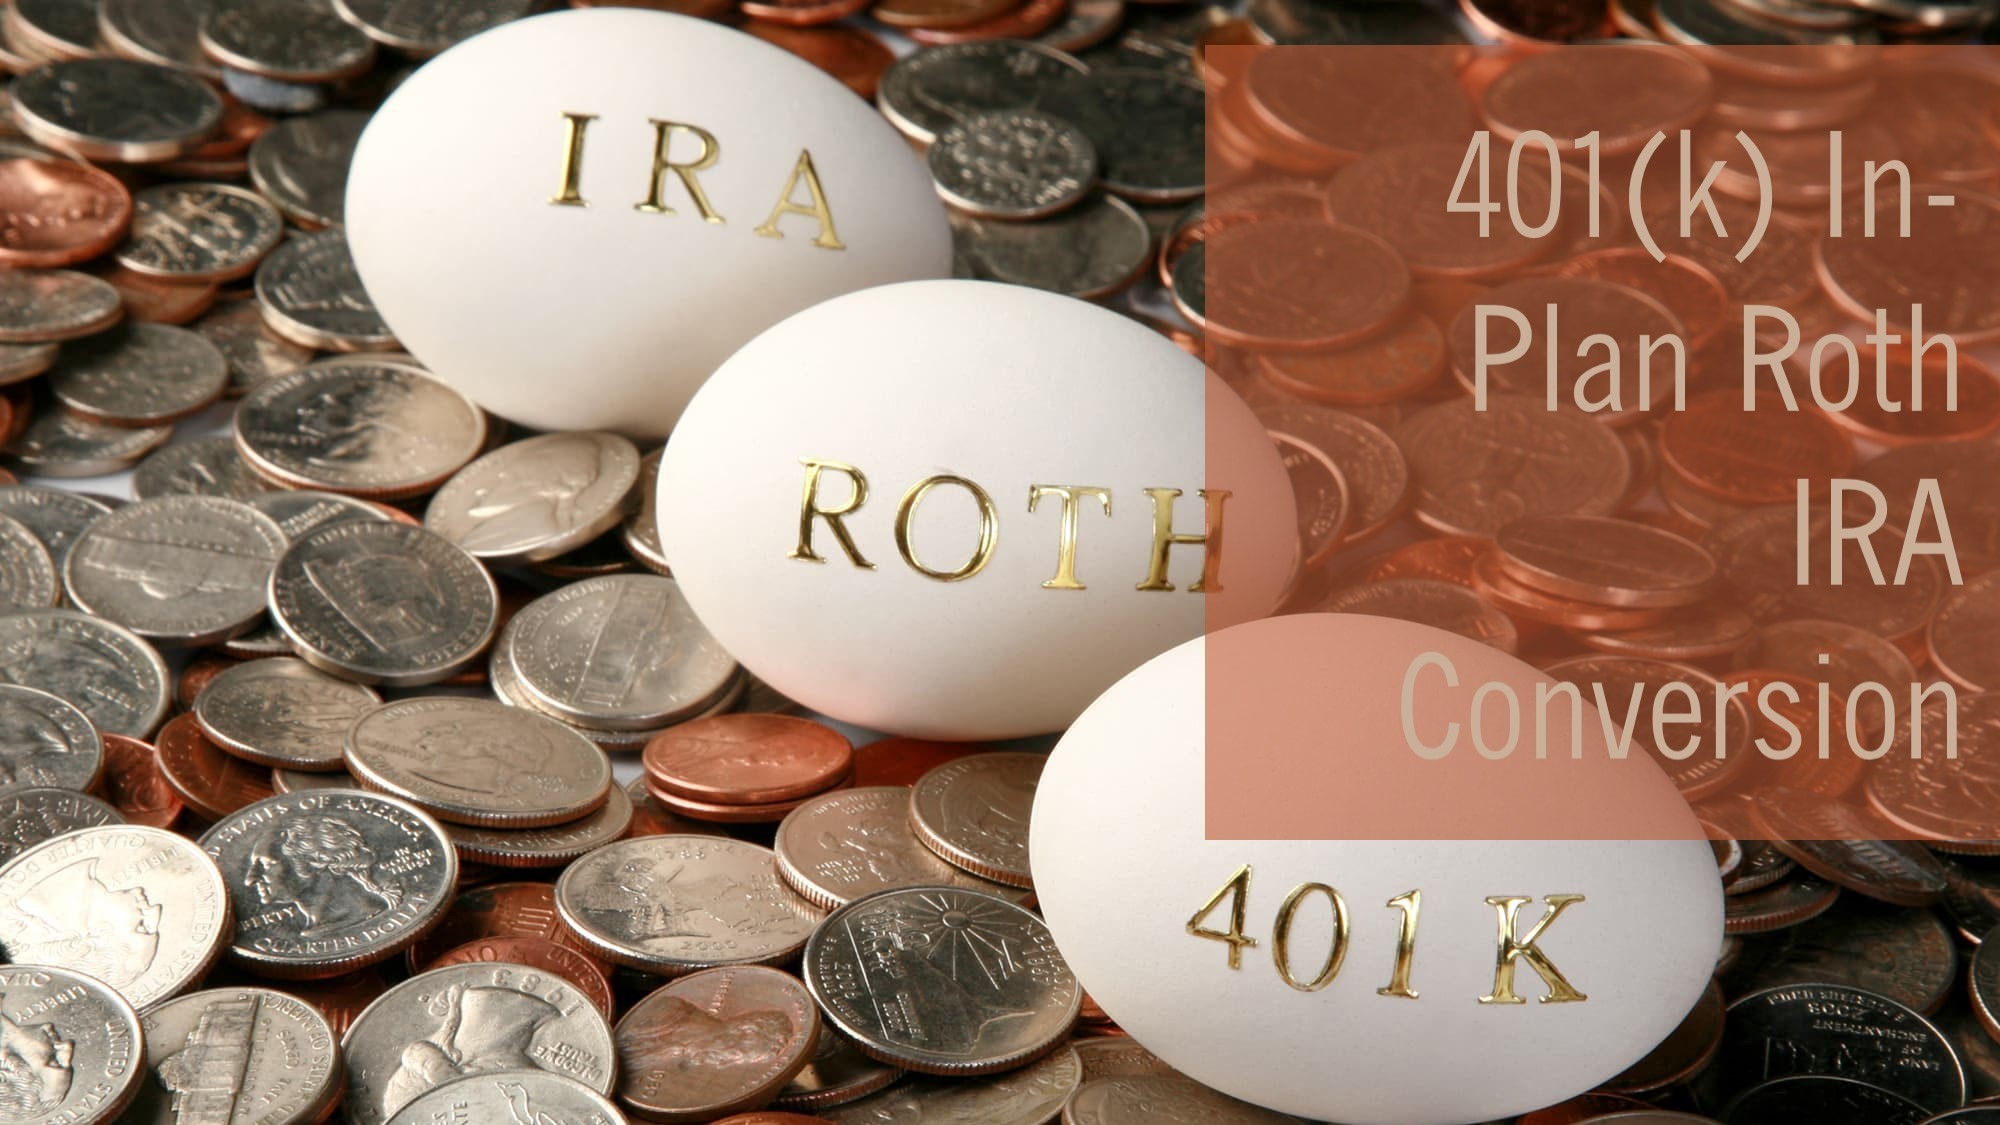 401 k In Plan Roth Conversion Wealth Management CFP 174 Advisors The 